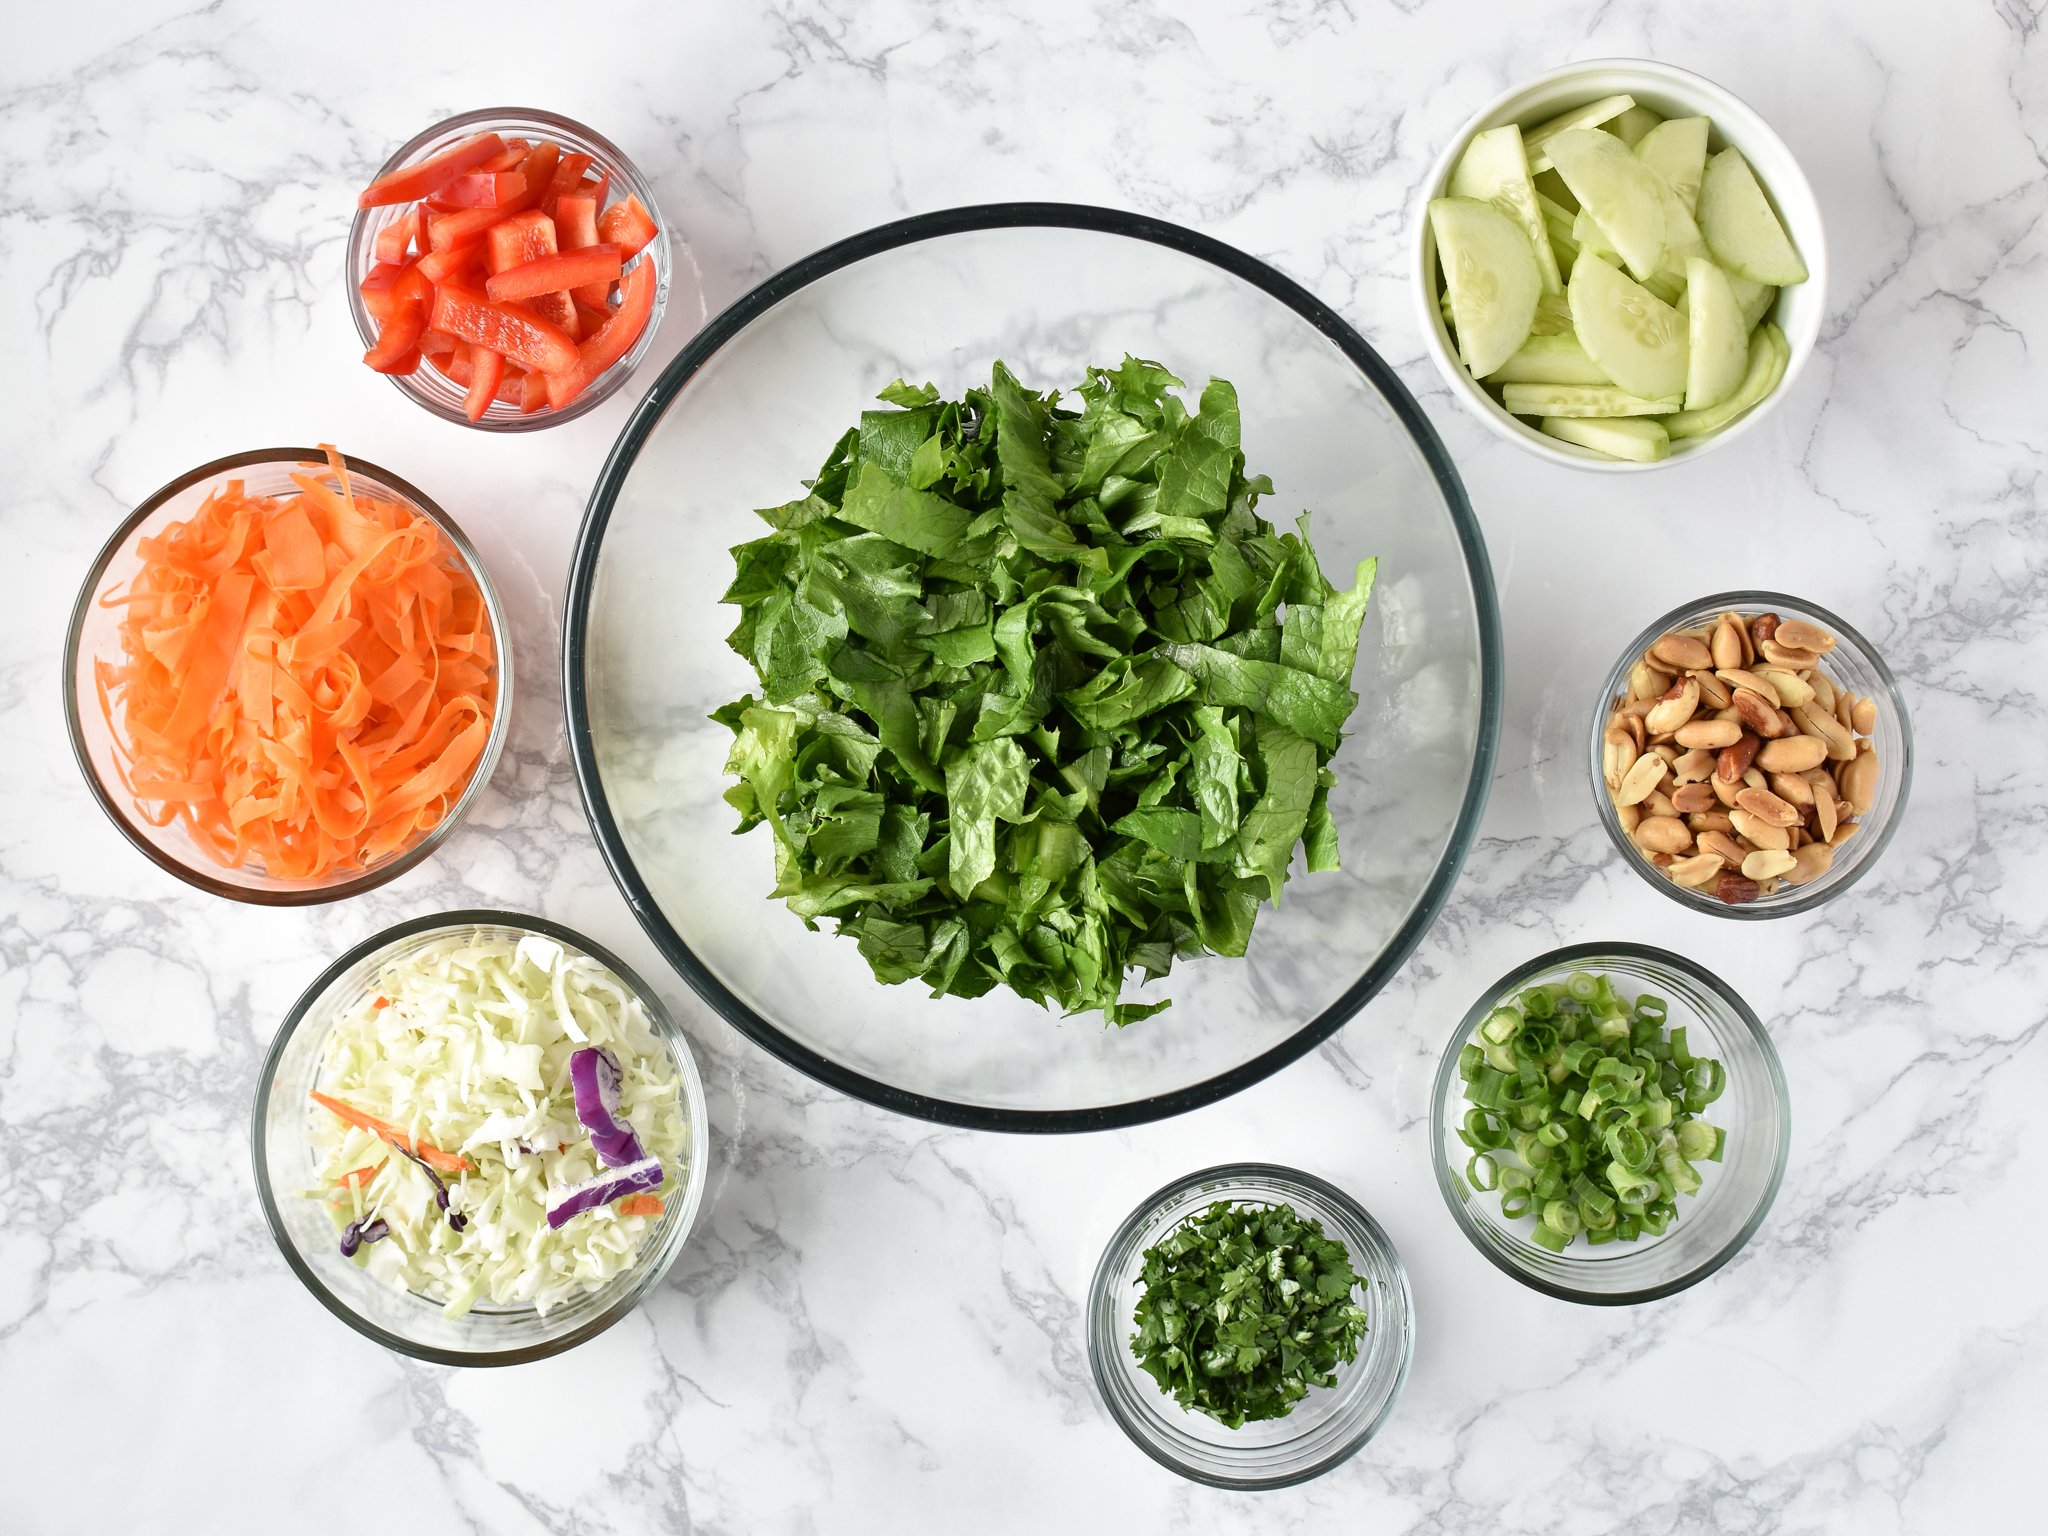 Meal Prep Chopped Thai Salad with Easy Peanut Dressing - Simple Thai-inspired chopped salad with a creamy peanut dressing recipe - Perfect for meal prep! - ProjectMealPlan.com